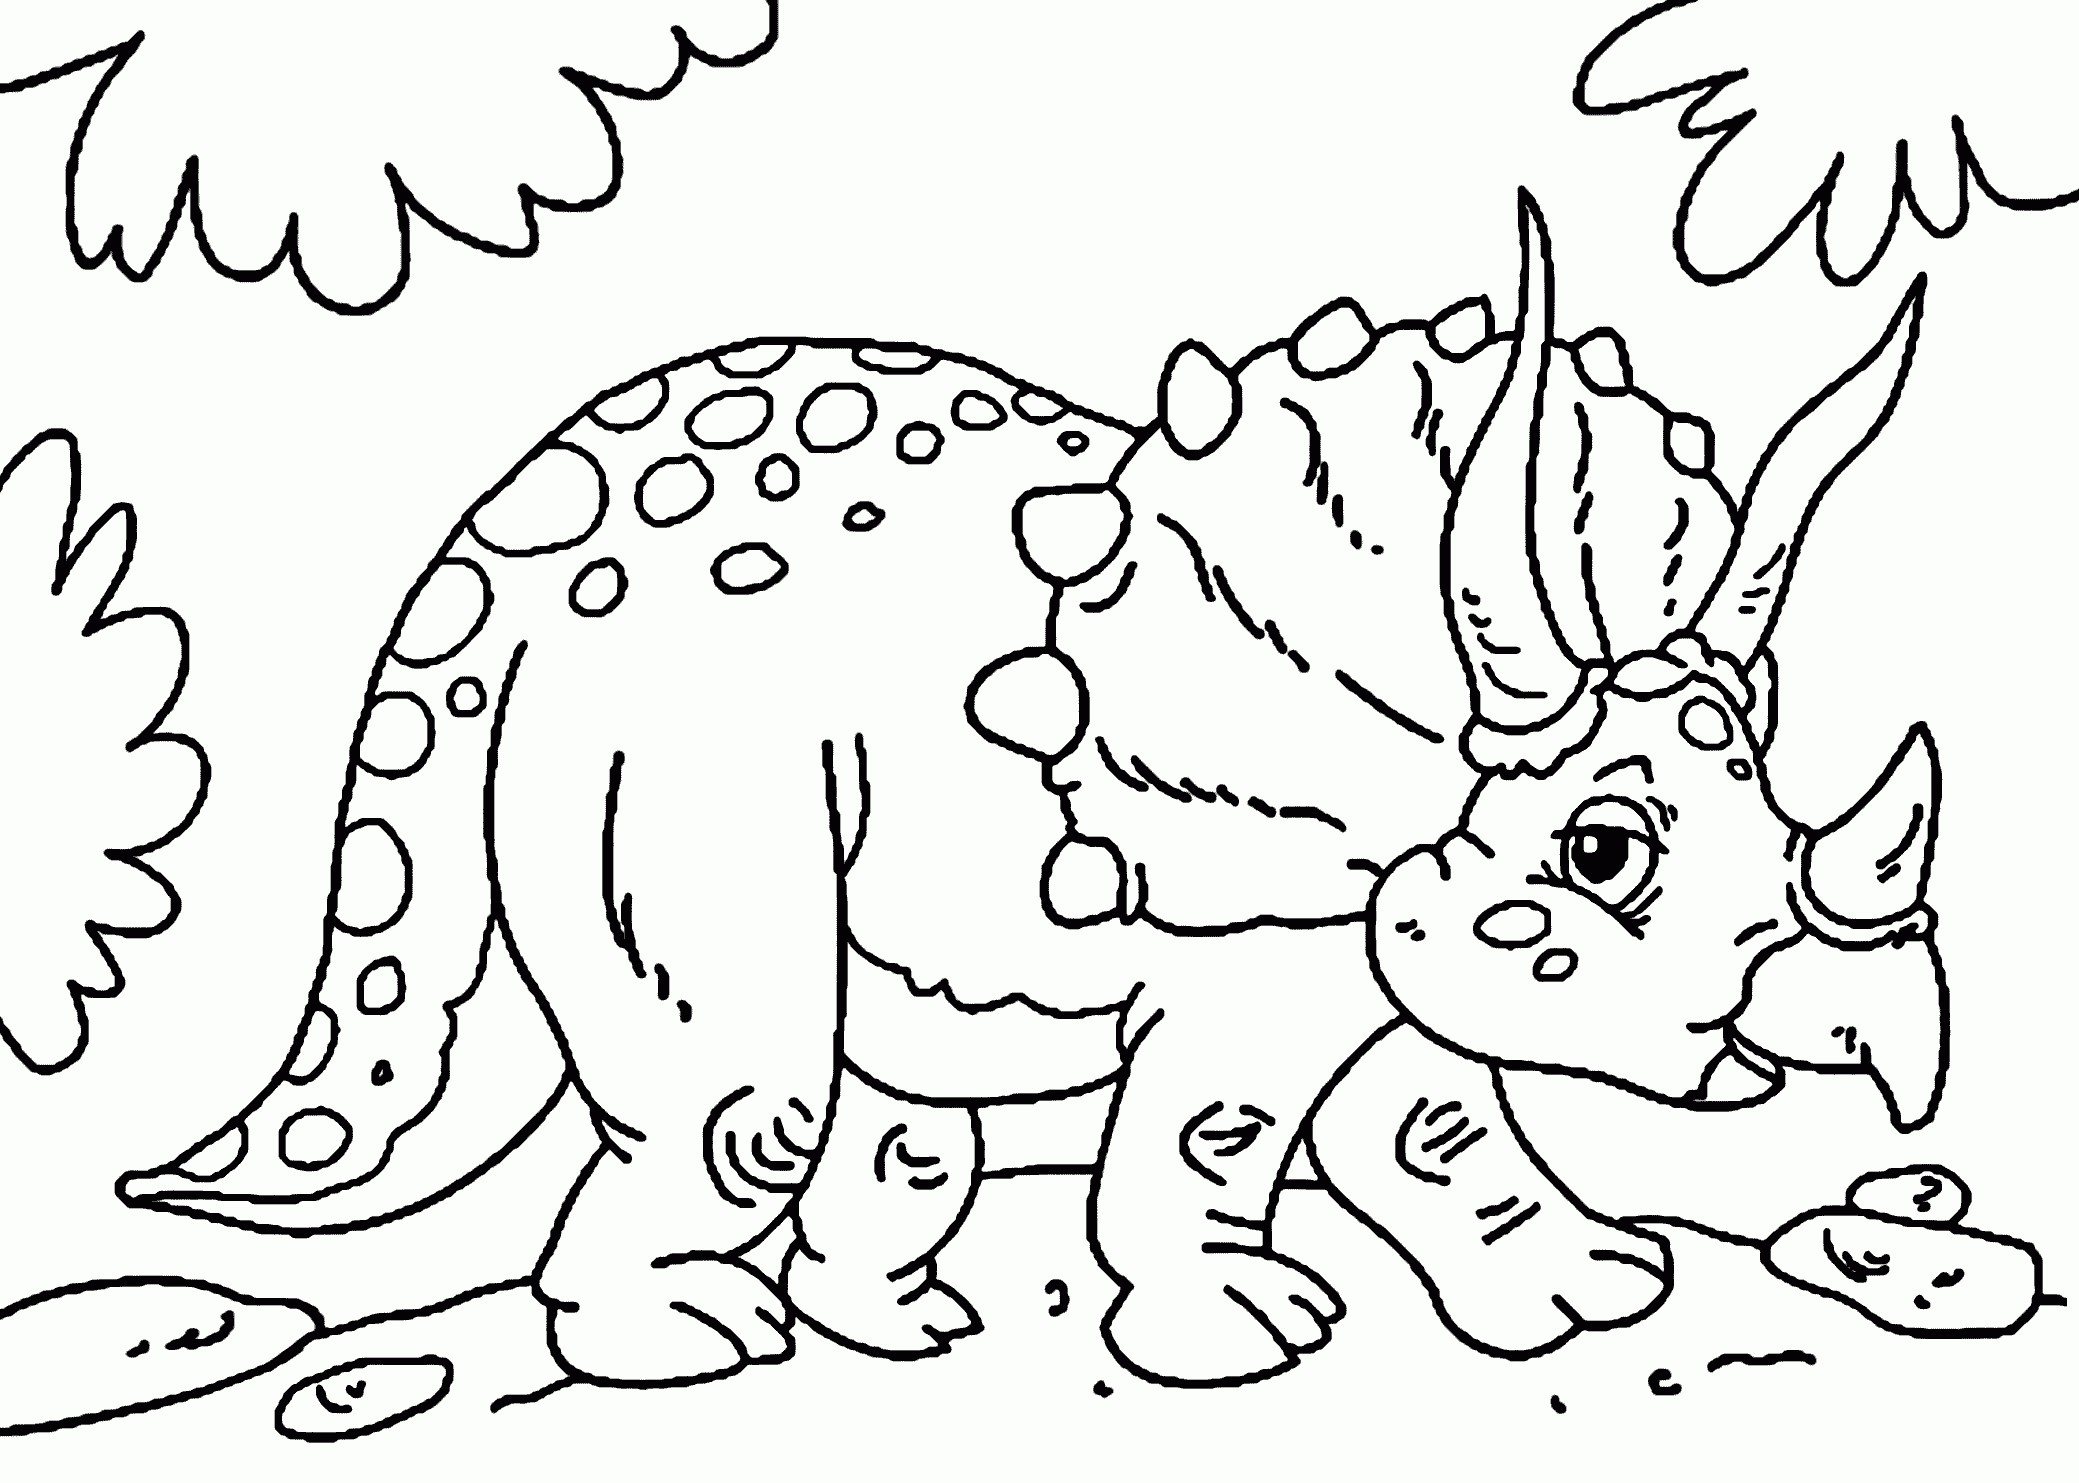 dinosaurs-cartoon-coloring-pages-of-dinosaurs-cartoon-coloring-pages Dinosaurs Cartoon Coloring Pages Dinosaurs 